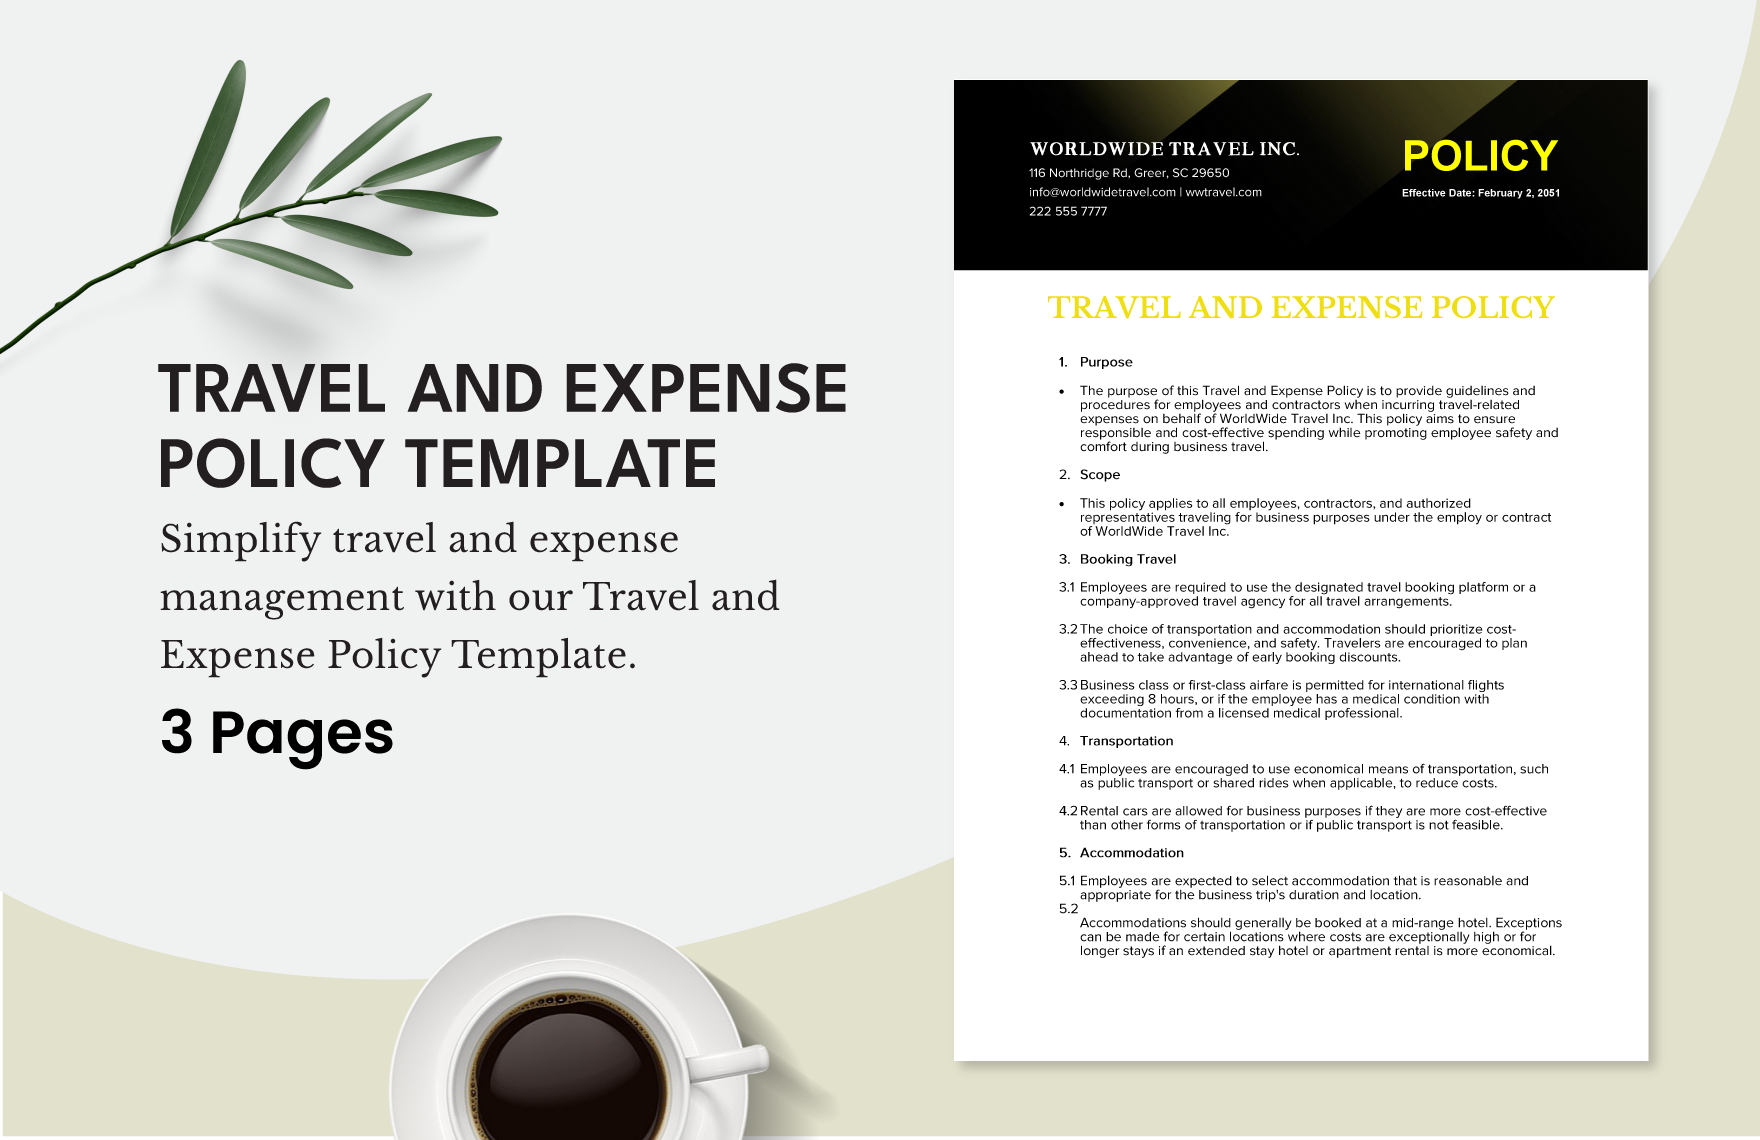 Travel and Expense Policy Template in Word, Google Docs, PDF